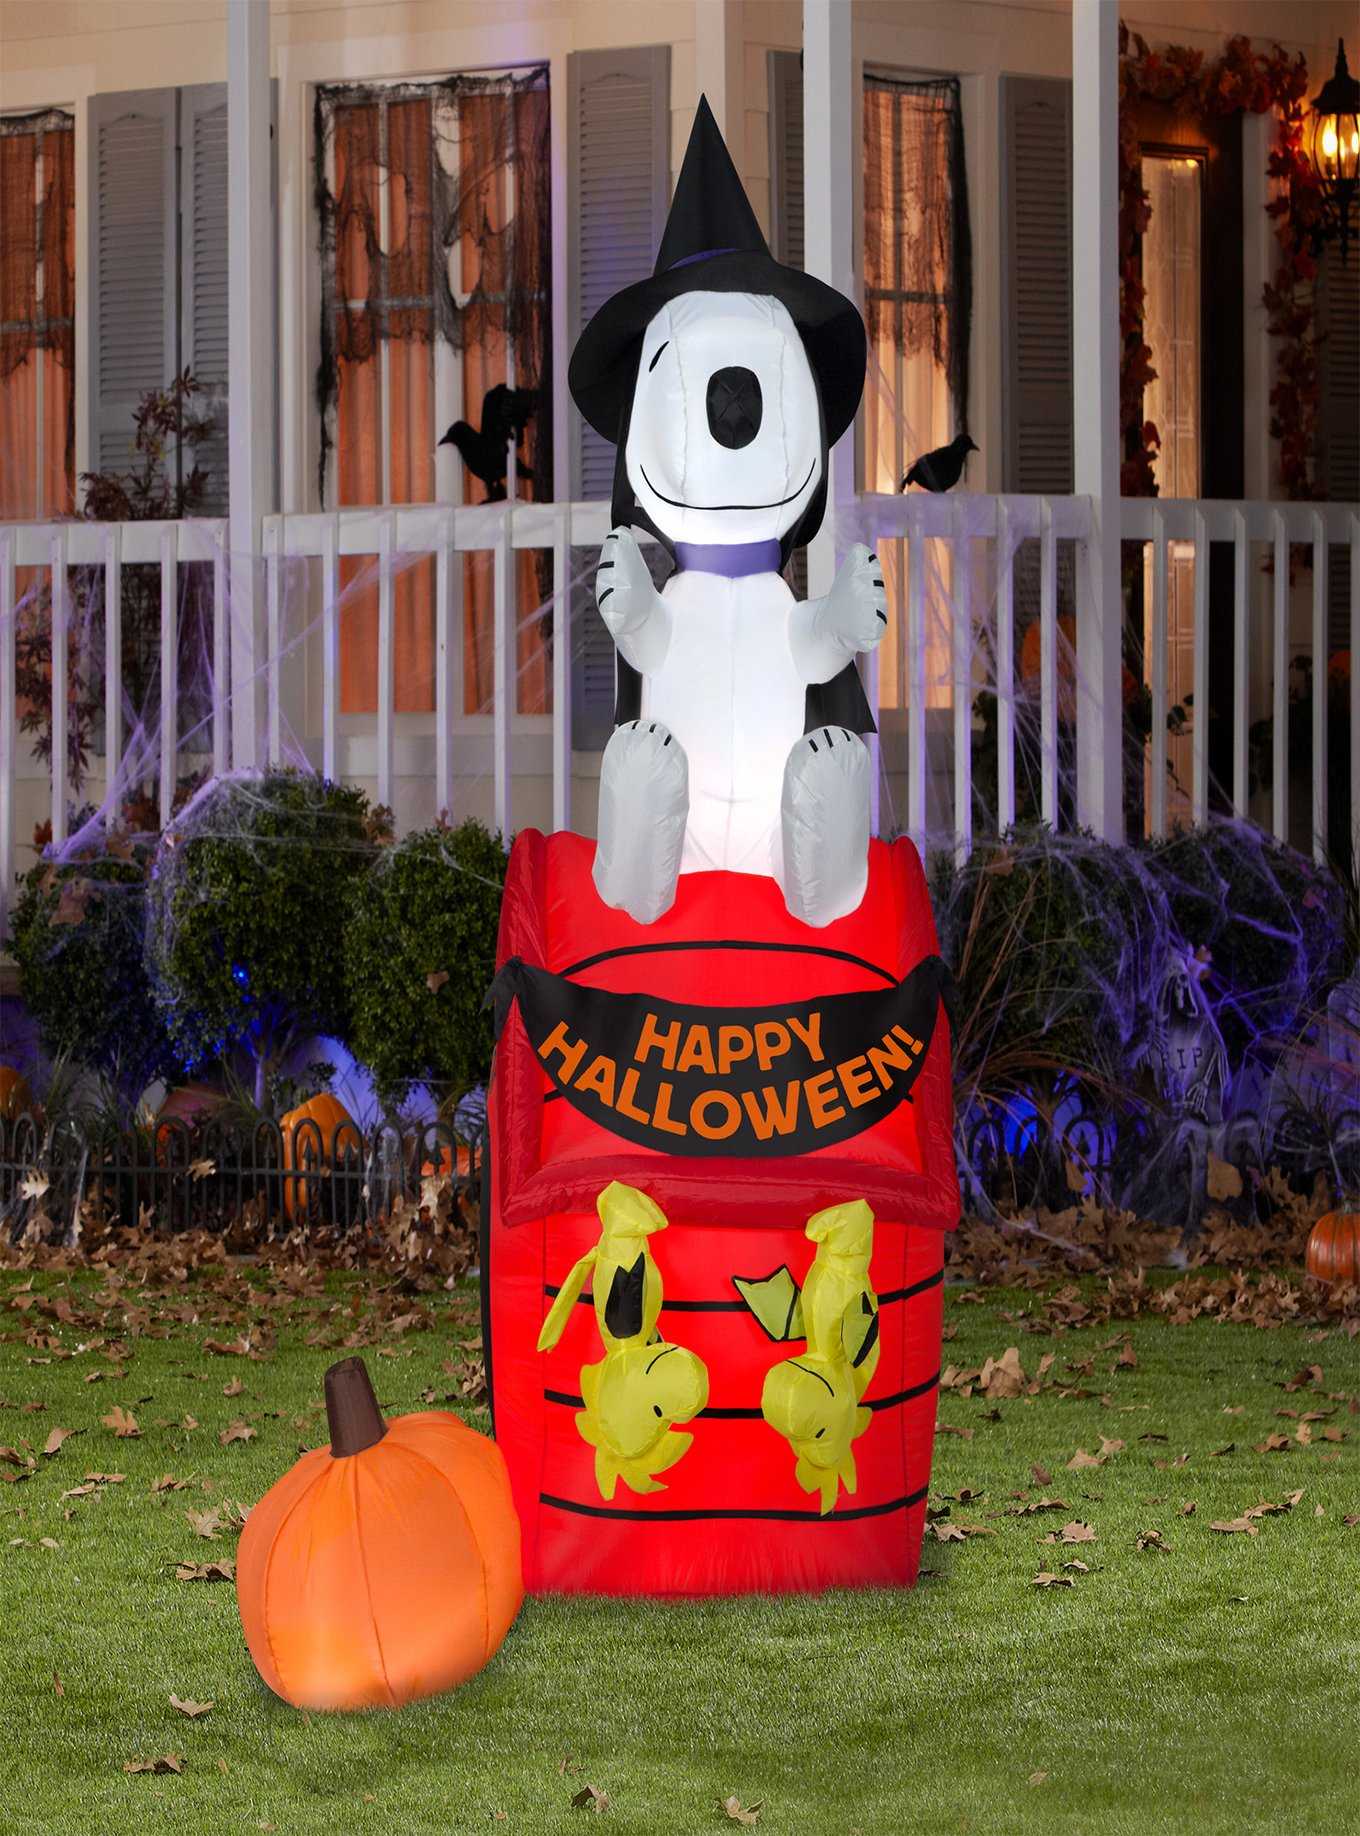 Peanuts Snoopy Halloween House Airblown, , hi-res